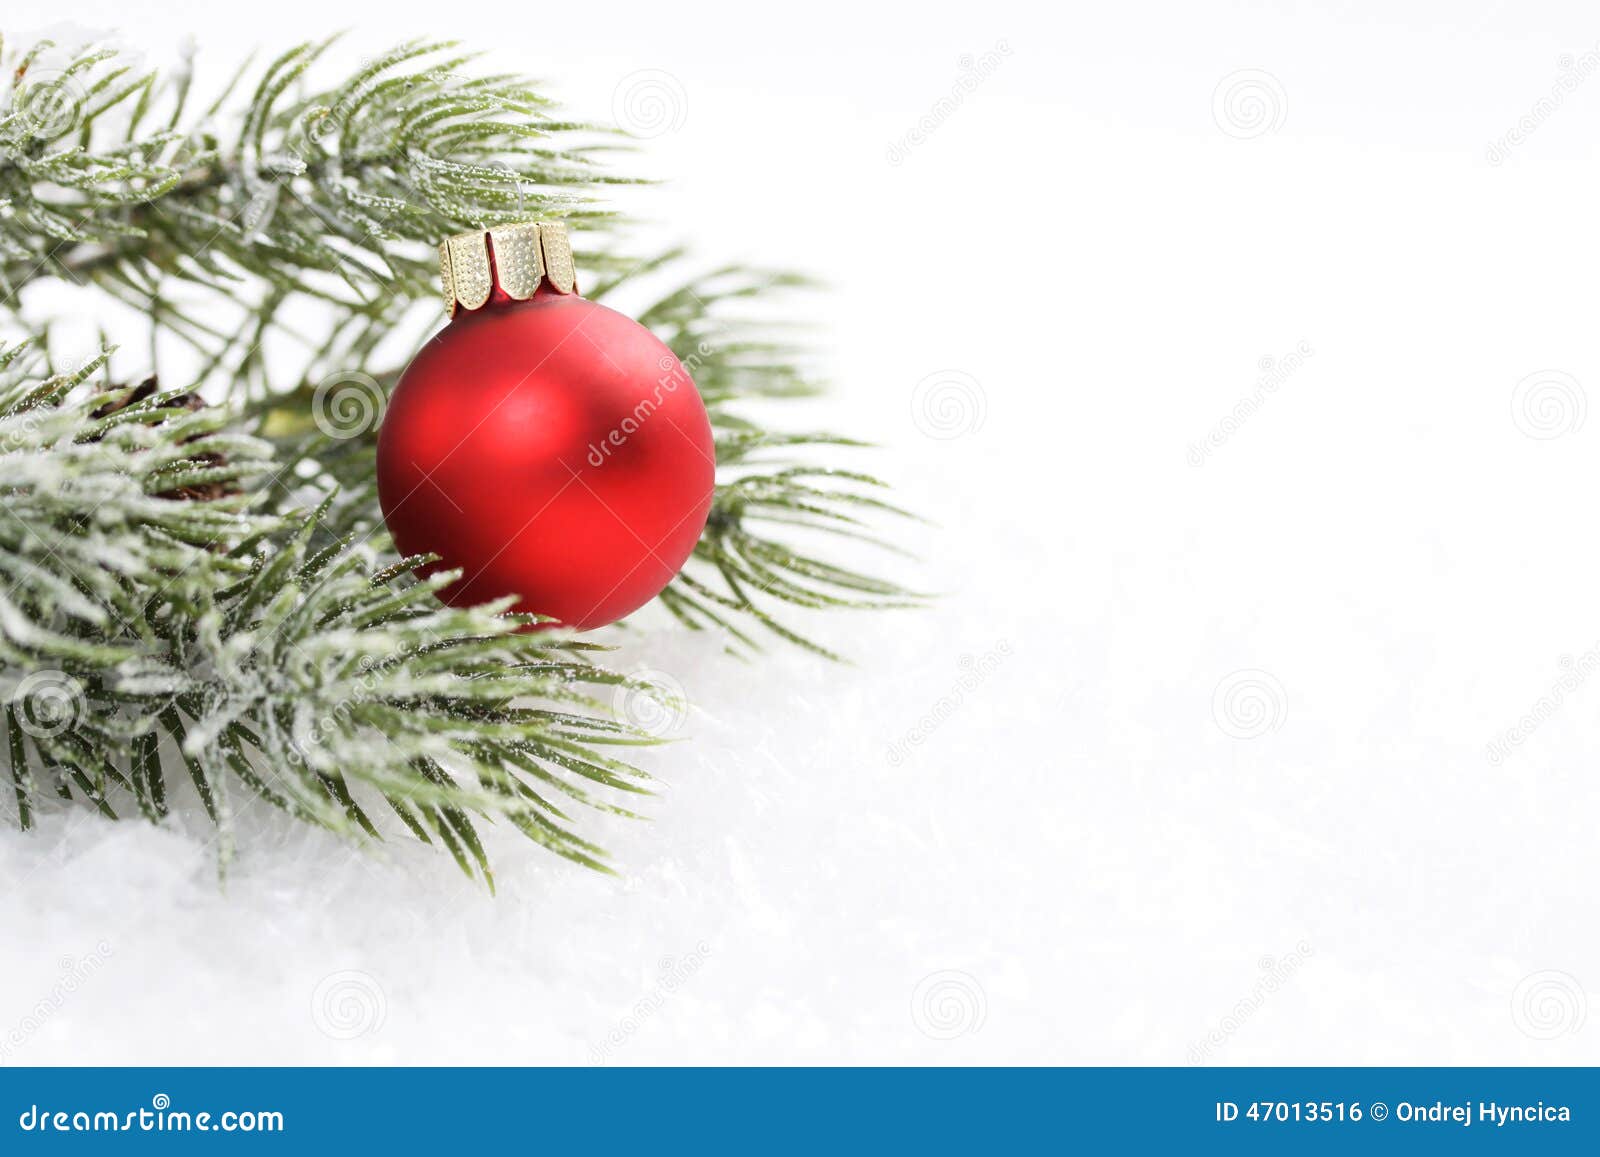 icing pine branch with cone and red matt christmas ball on snow